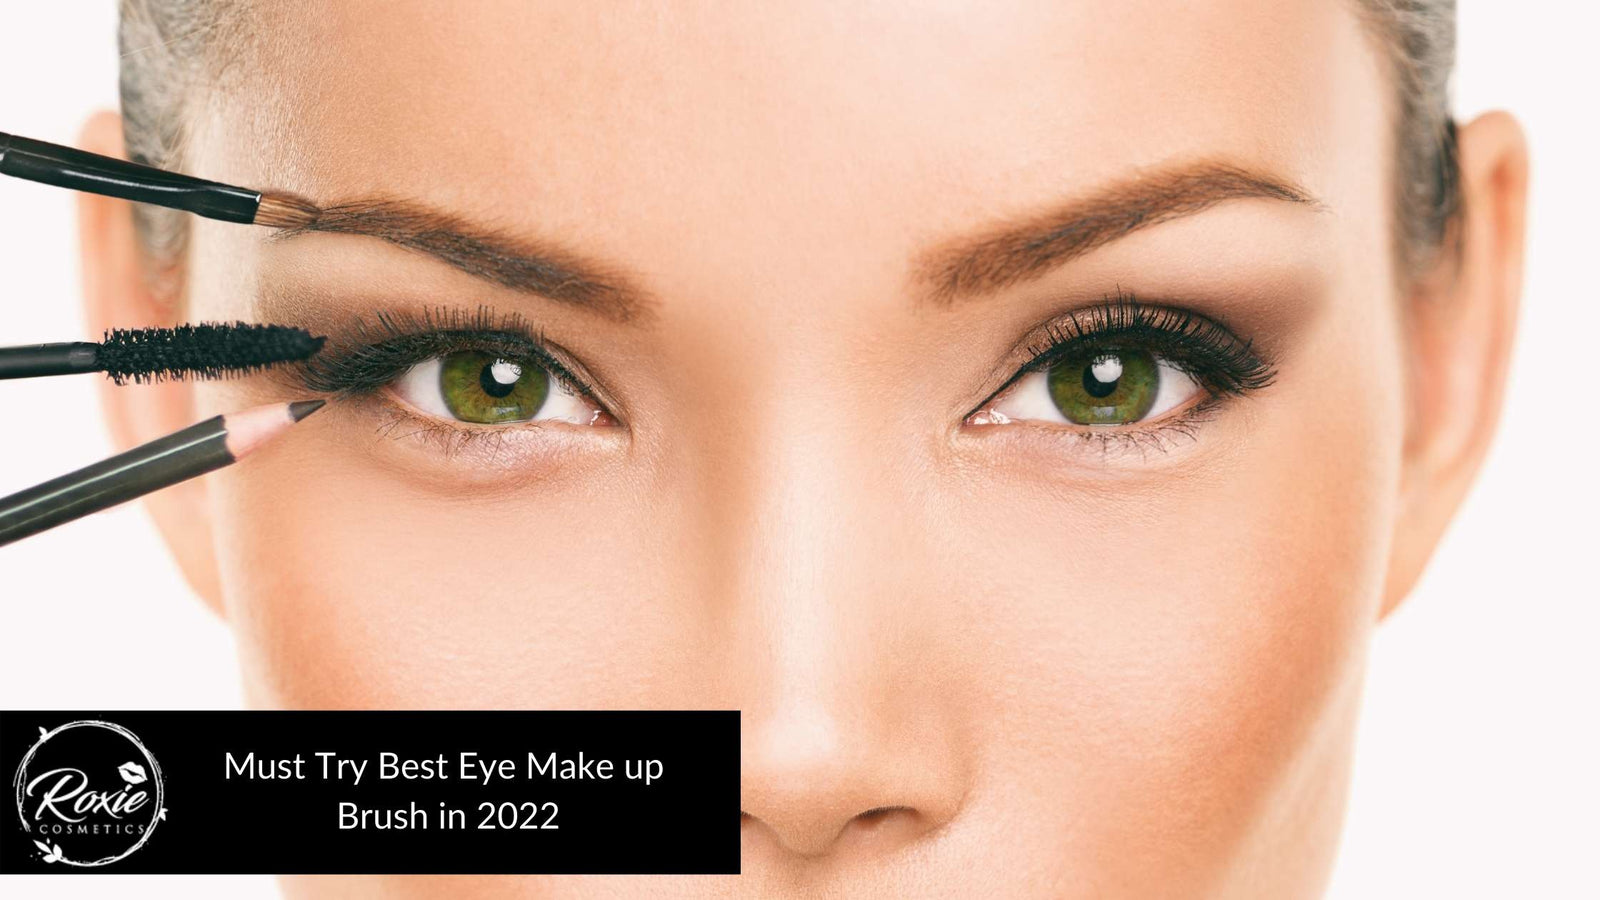 15 Must Try Make Cosmetics Eye – Brush 2022 in Roxie Best up